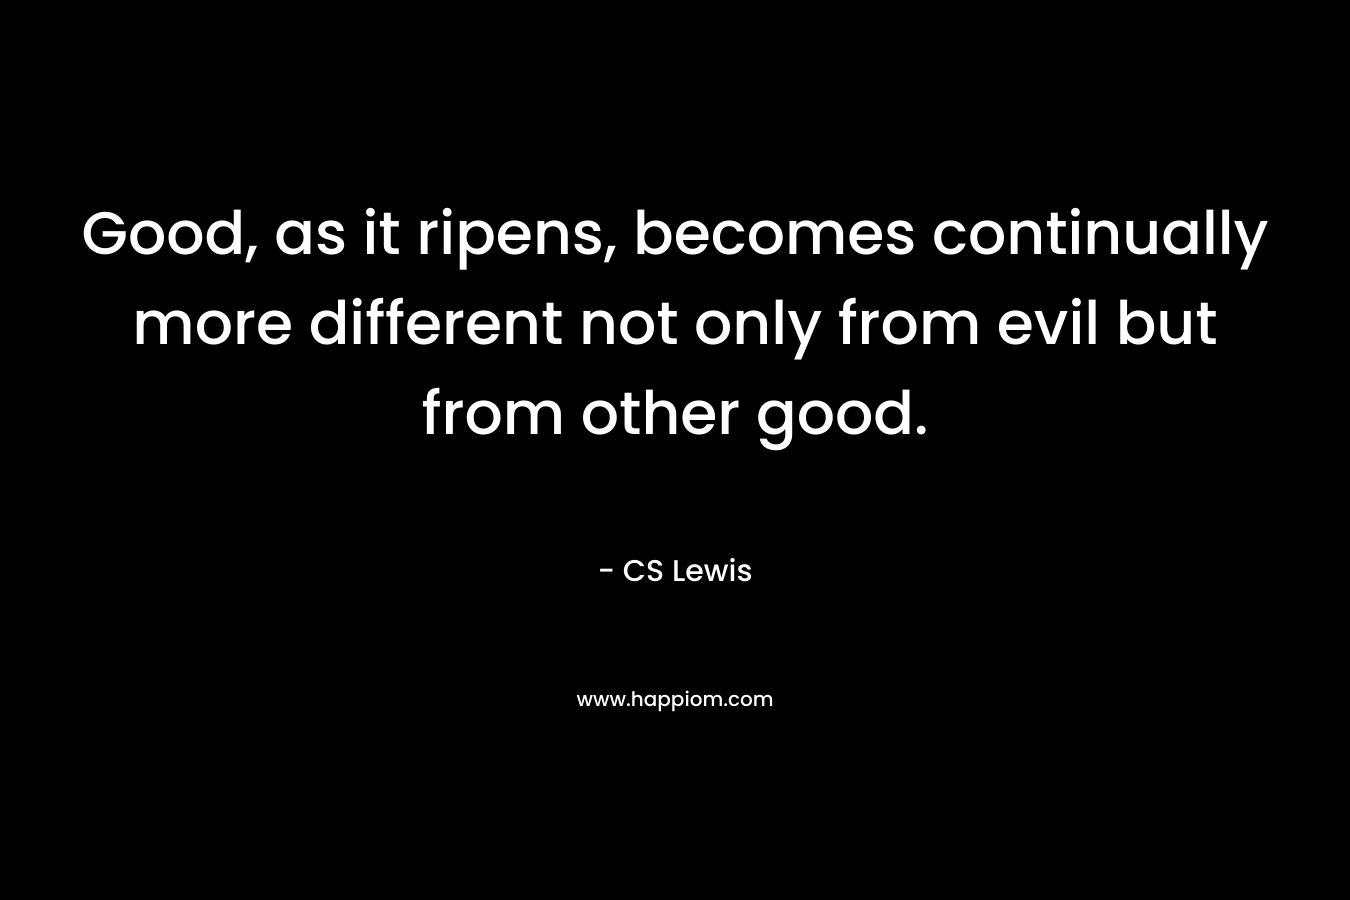 Good, as it ripens, becomes continually more different not only from evil but from other good.